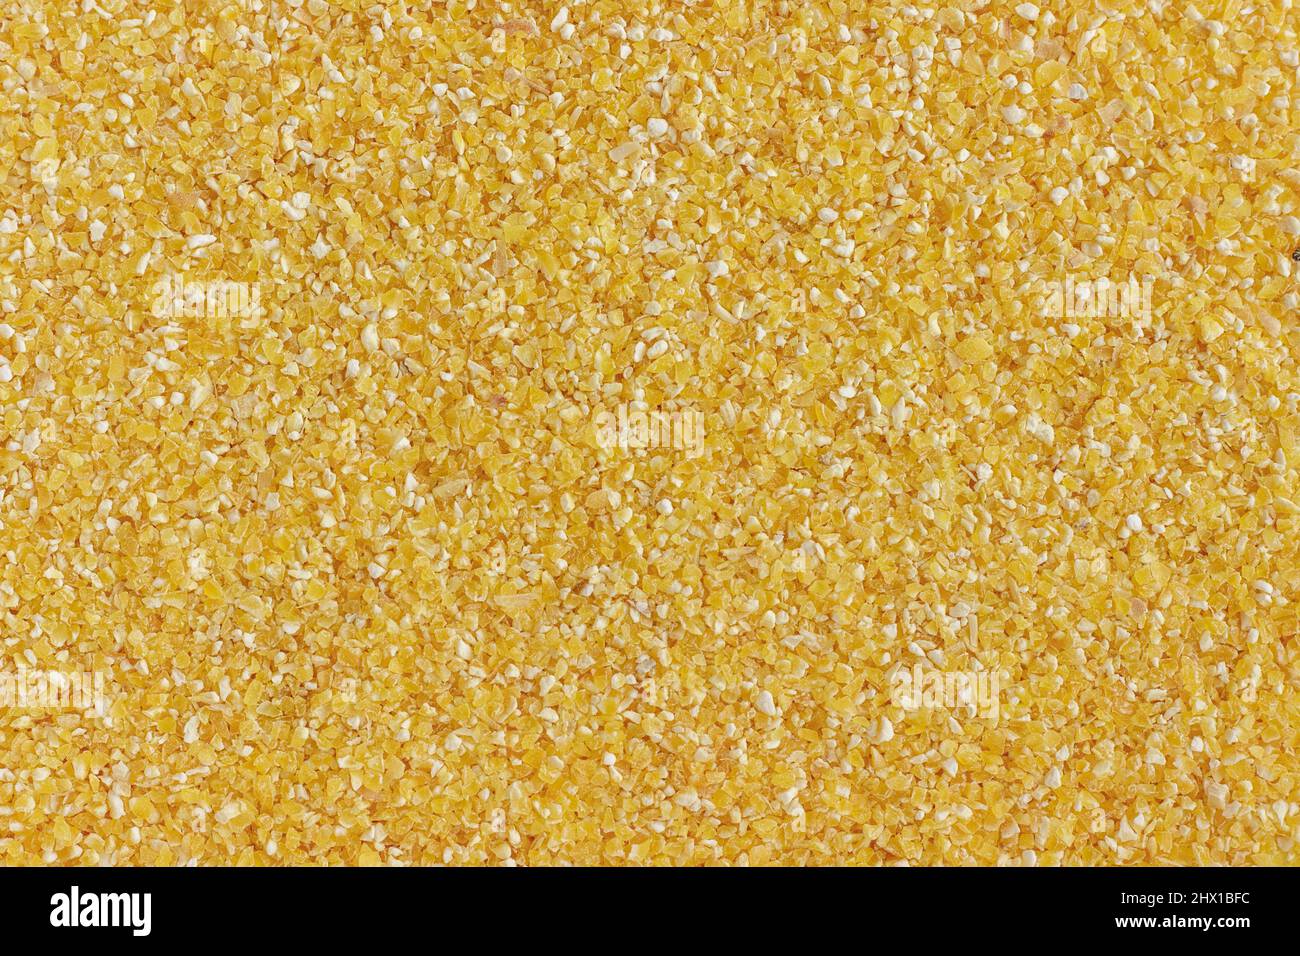 Corn grits for cooking tasty and healthy food. Close-up. Background, texture. Stock Photo